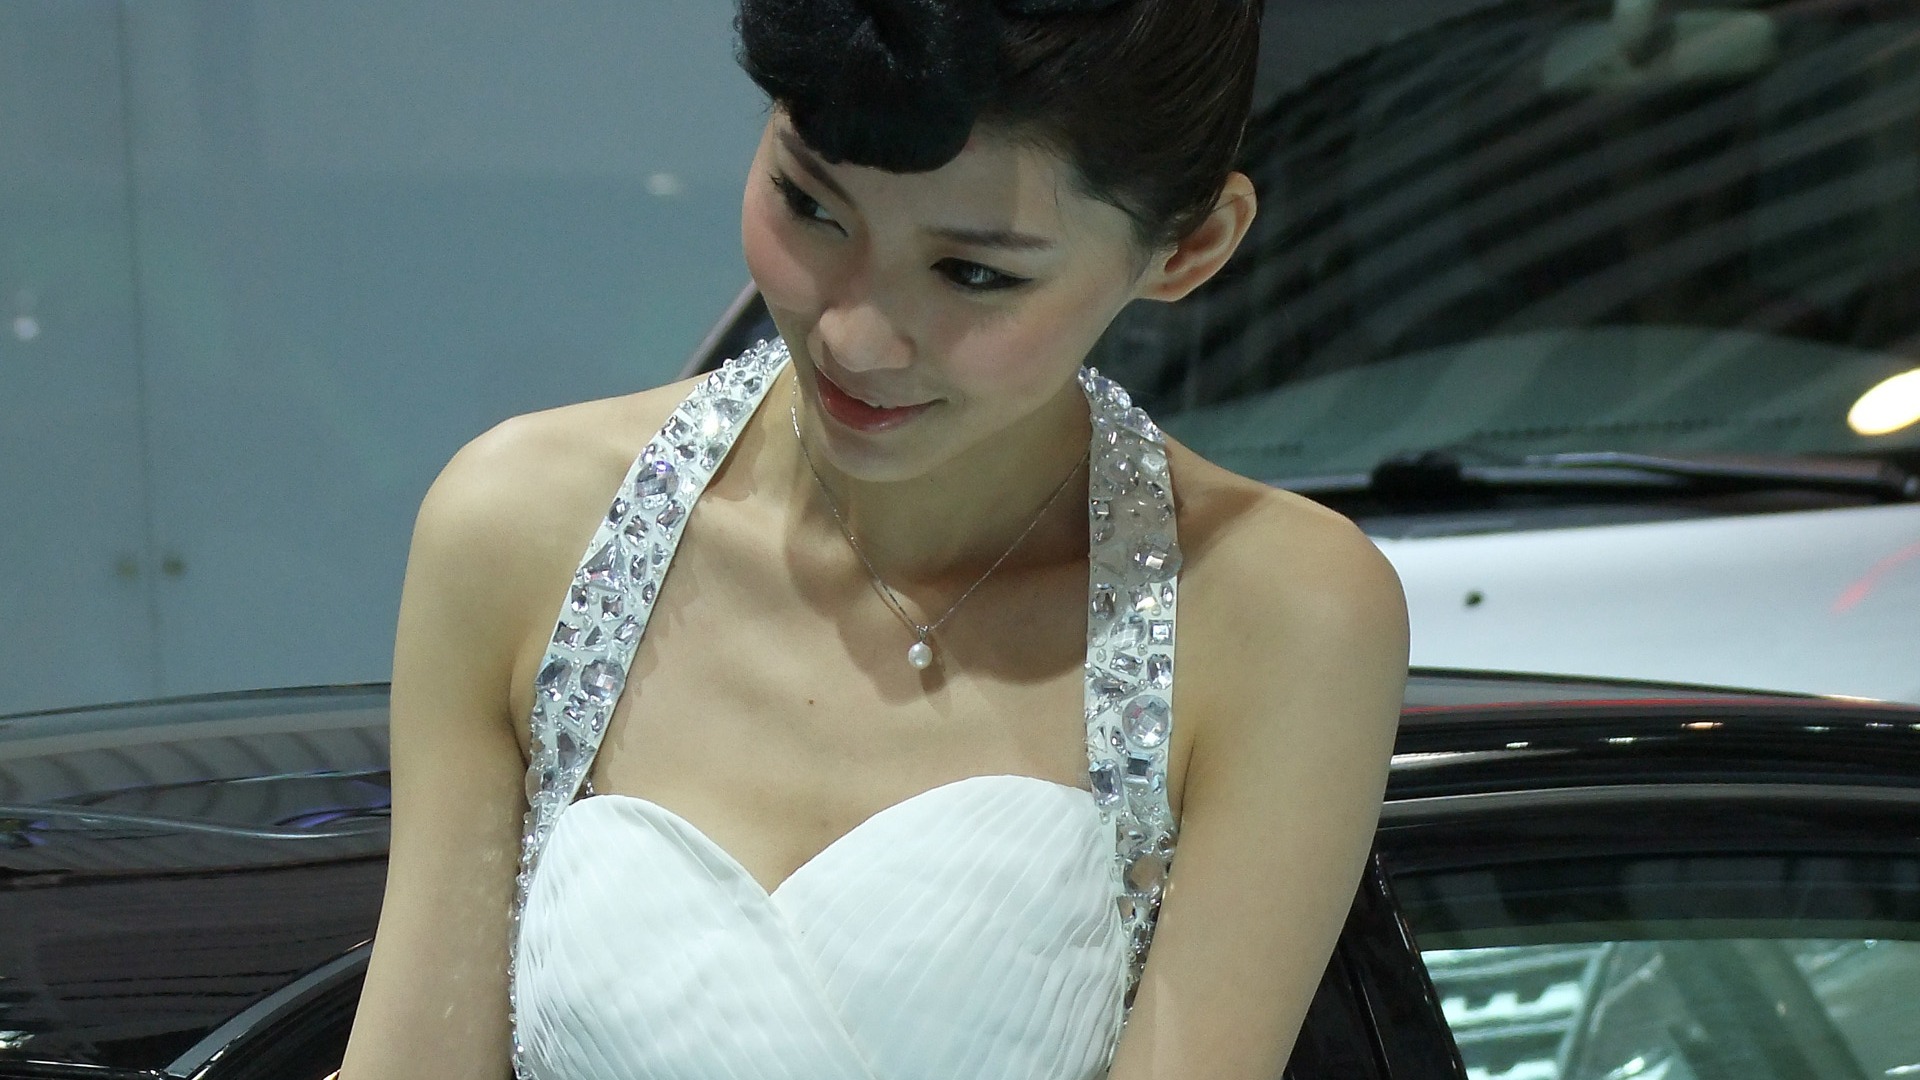 2010 Beijing Auto Show car models Collection (2) #1 - 1920x1080